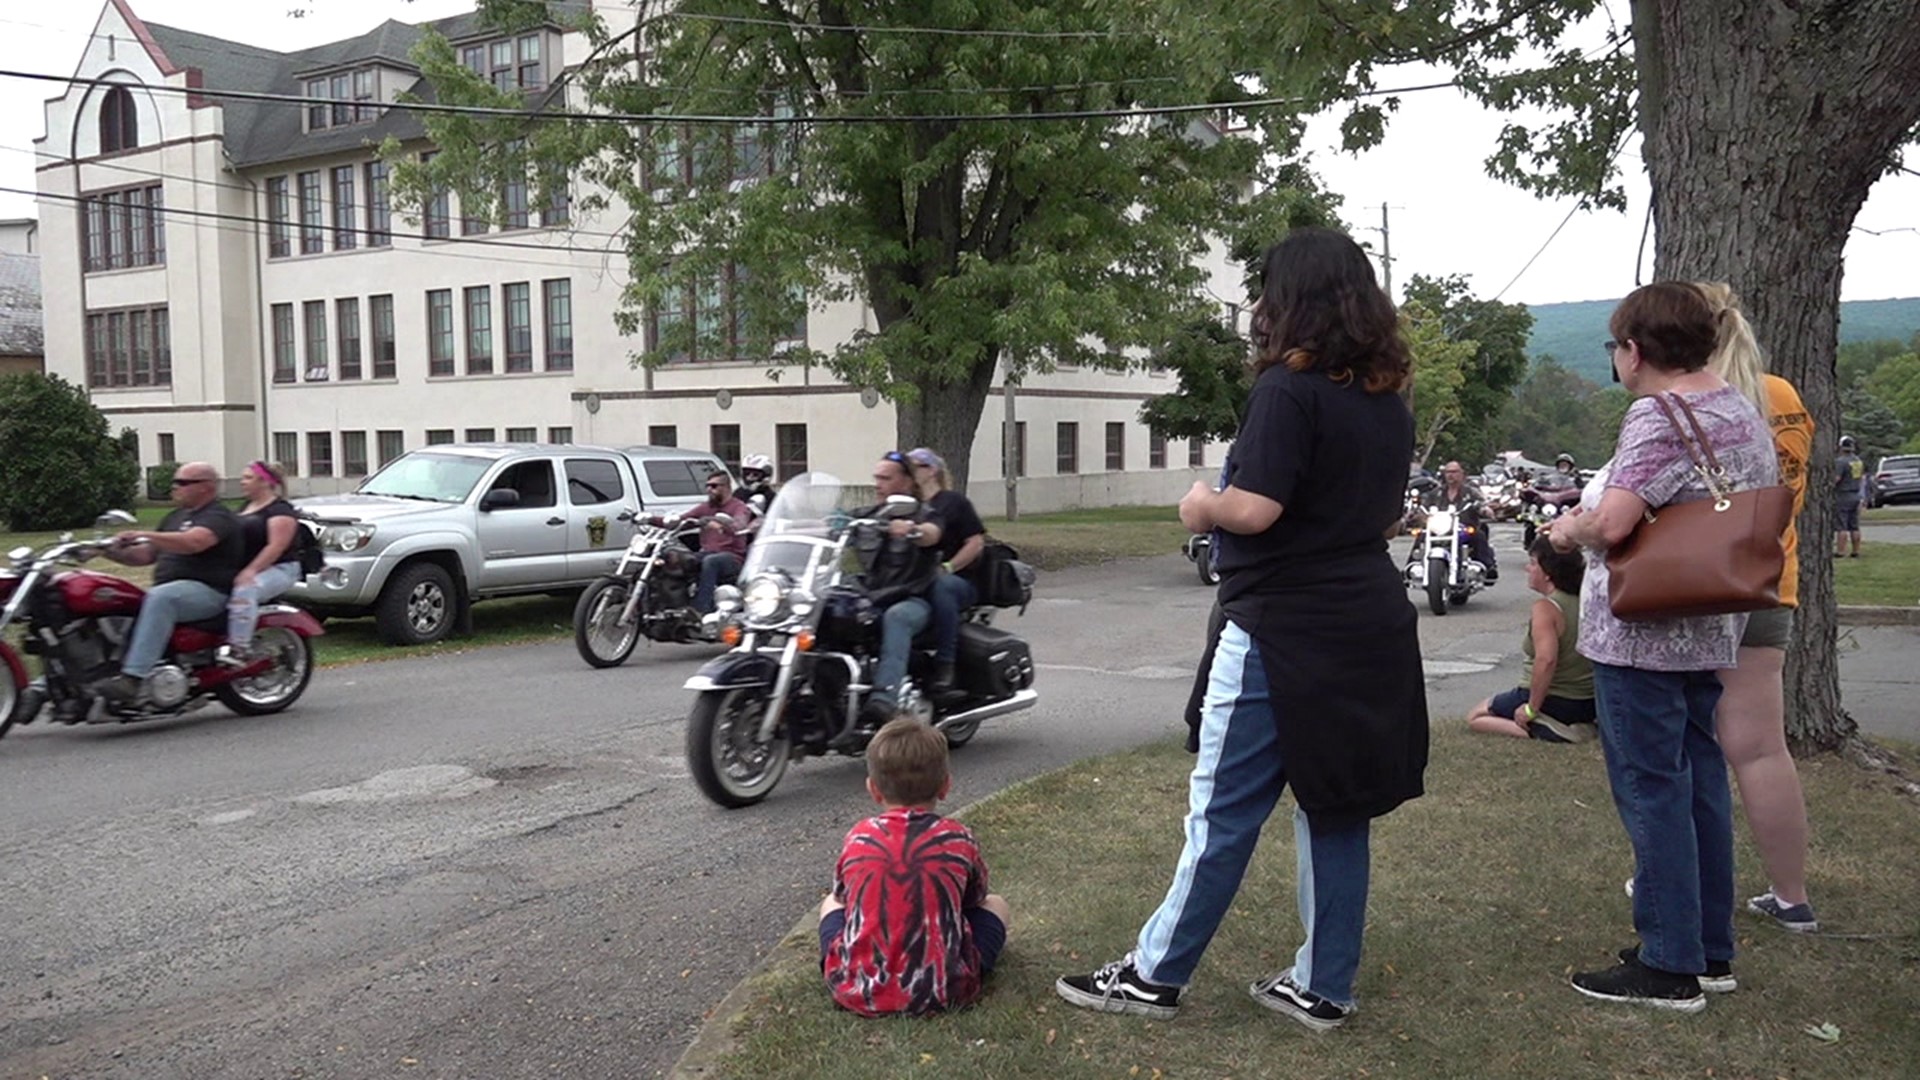 The 21st Annual Valley with a Heart Motorcycle Ride was held in Newport Township Sunday.